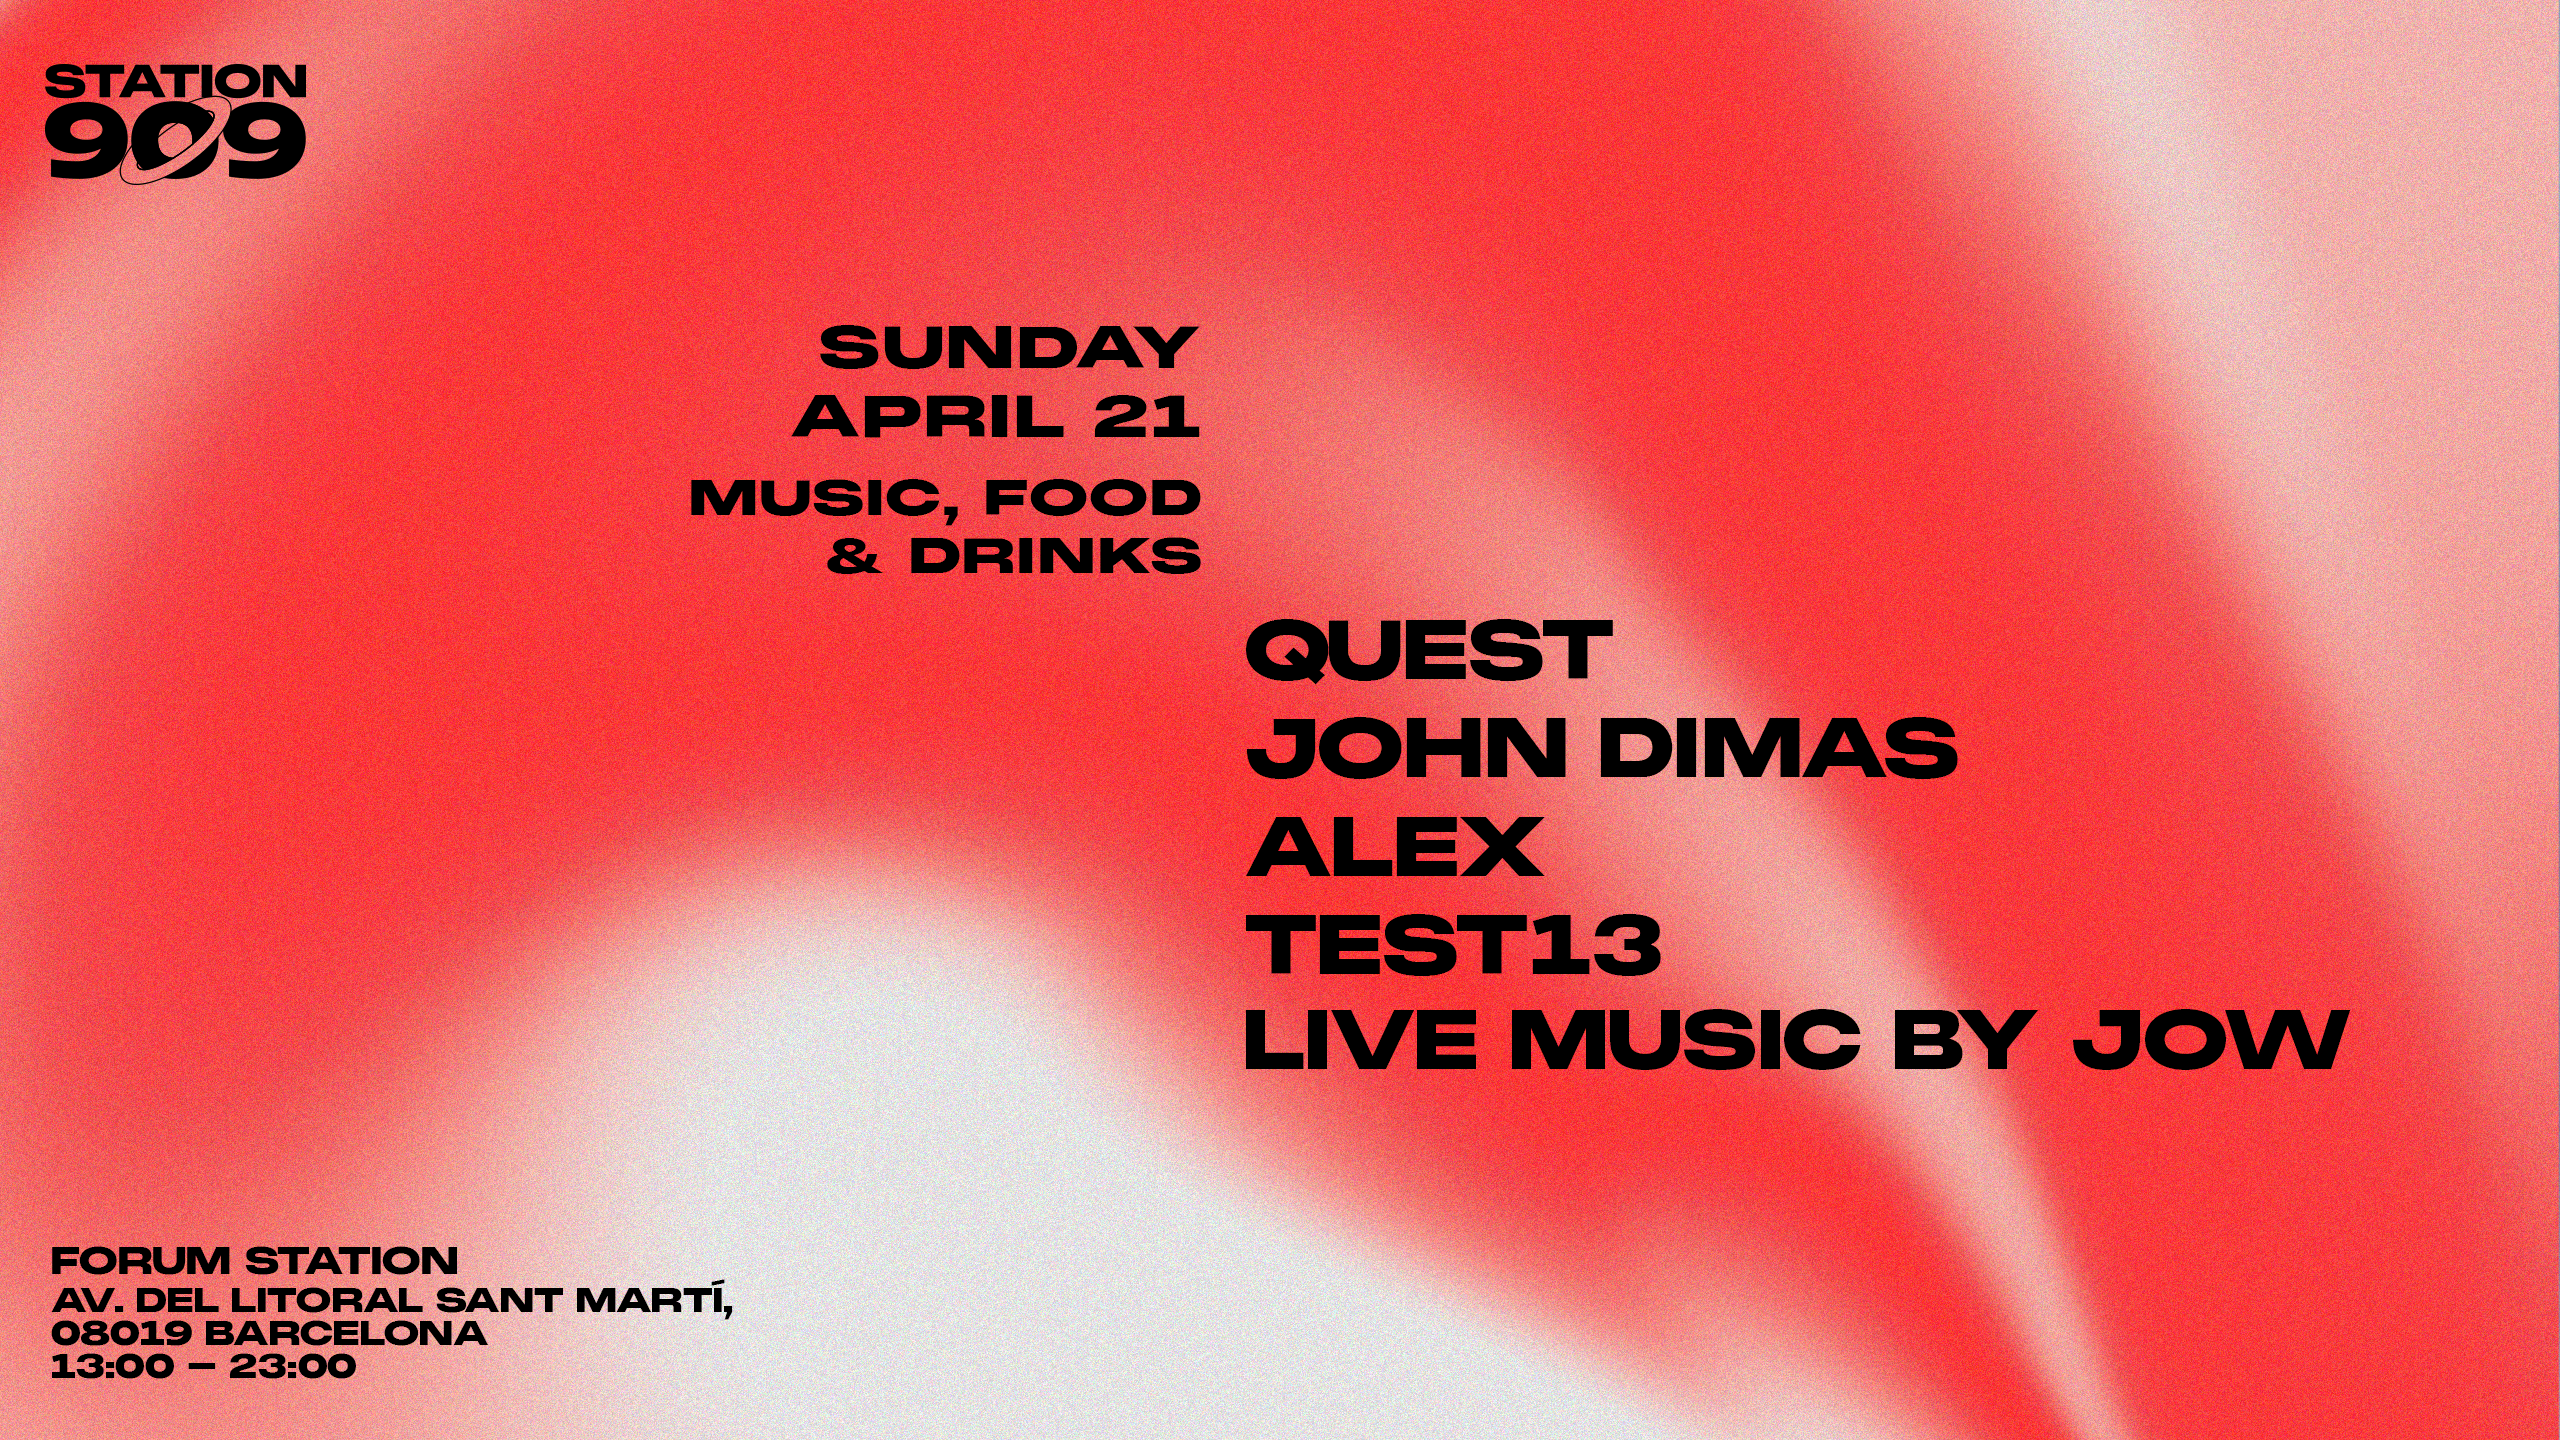 Open Air + Market, Food & Drink at Station 909 with Quest, John Dimas - フライヤー表